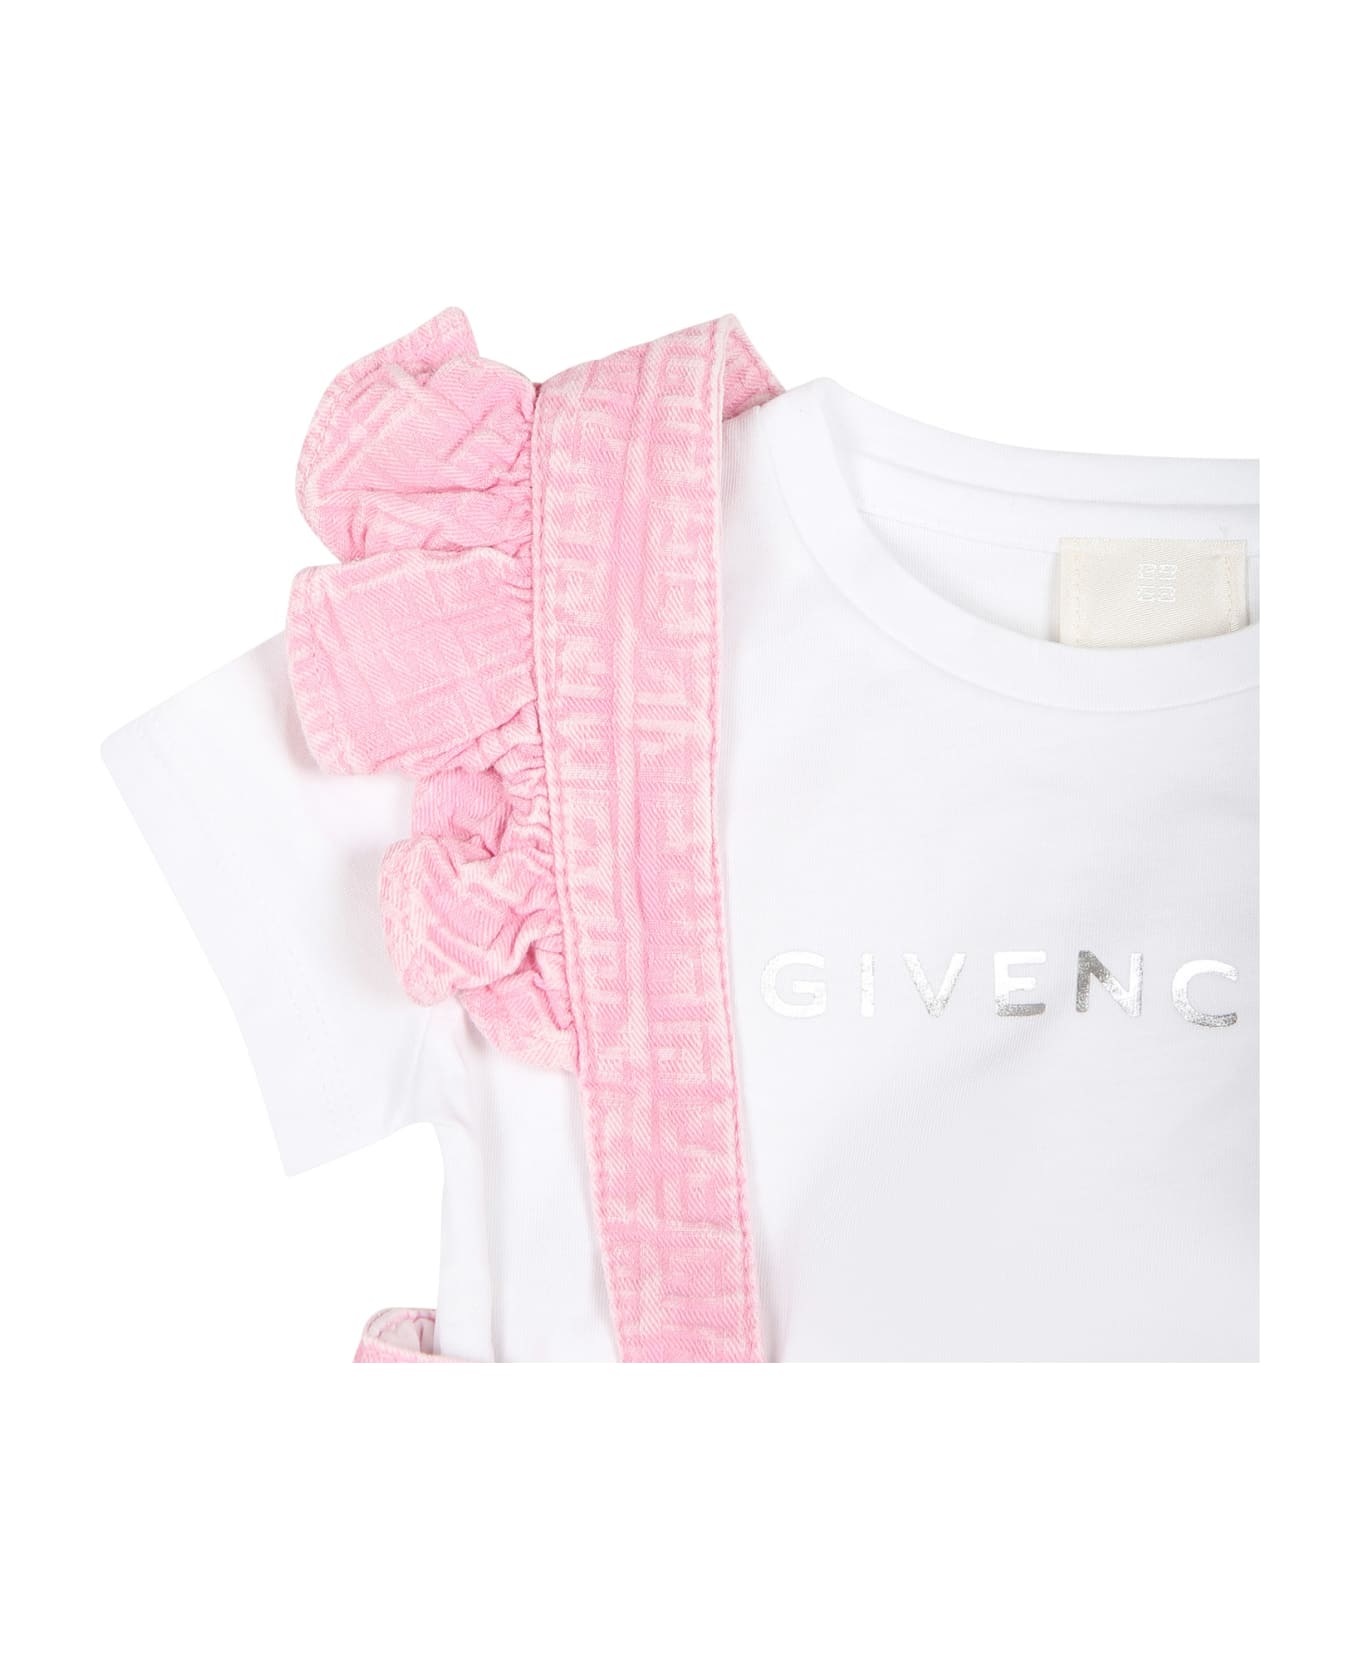 Givenchy PROFOND Pink Suit For Baby Girl With Logo - Pink